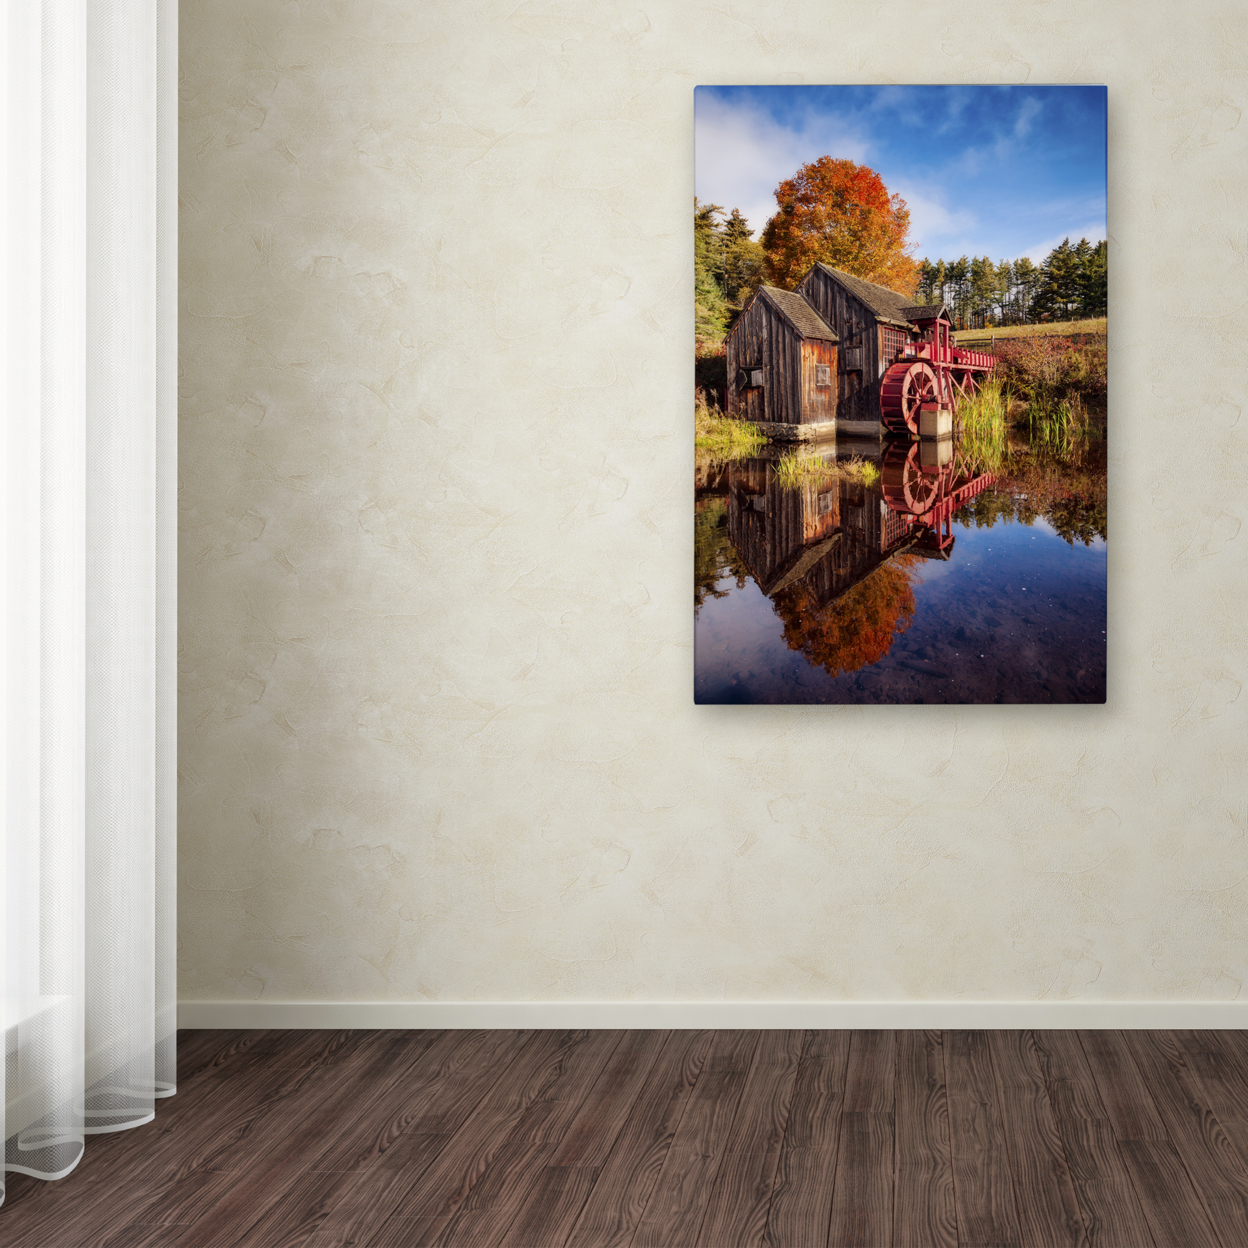 Michael Blanchette Photography 'The Old Grist Mill' Canvas Art 16 X 24